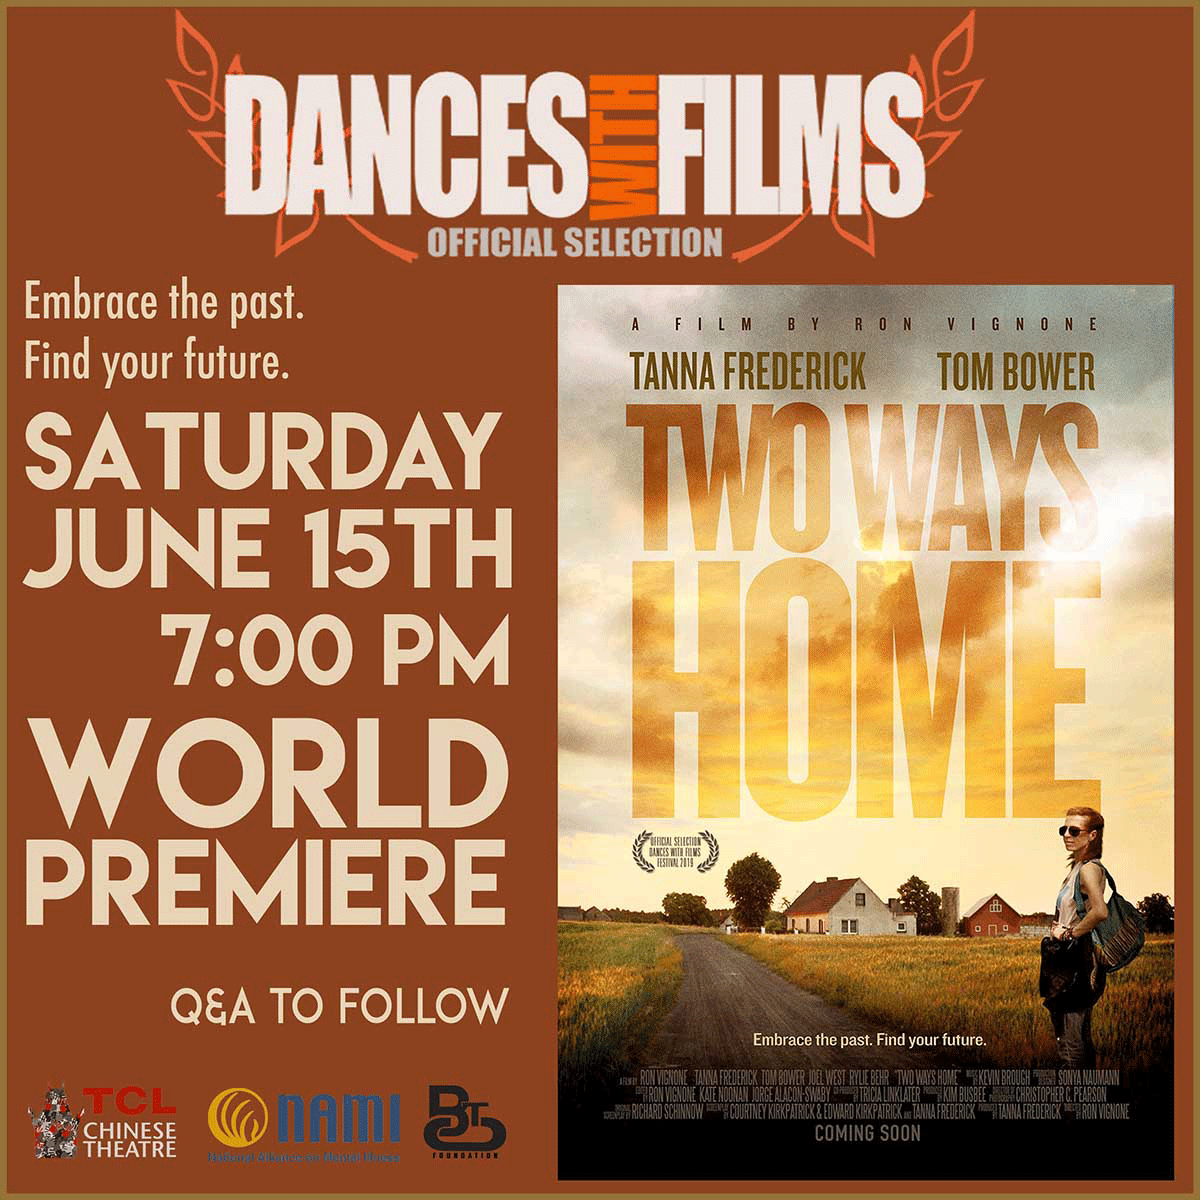 Two Ways Home World Premiere, Dances With Films 22